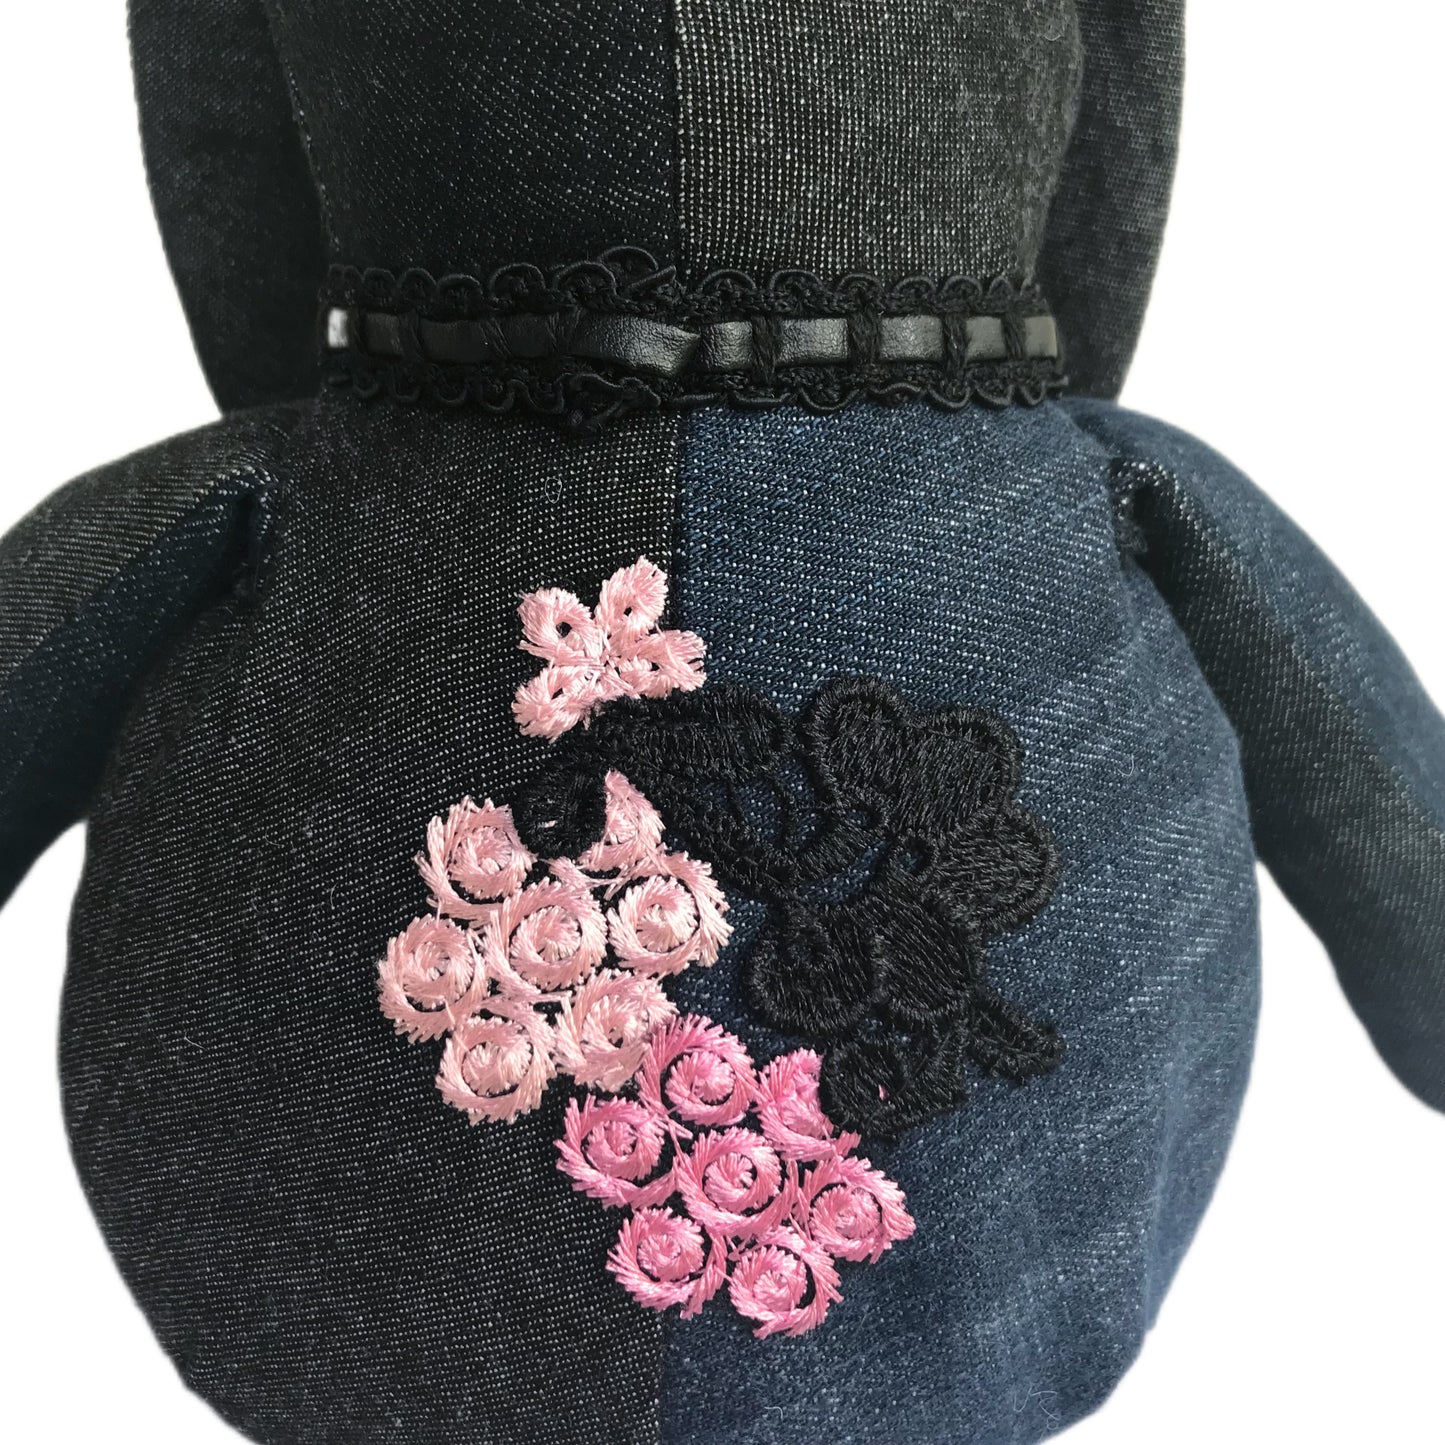 Blossom Bunny - Made from Recycle Denim Jeans